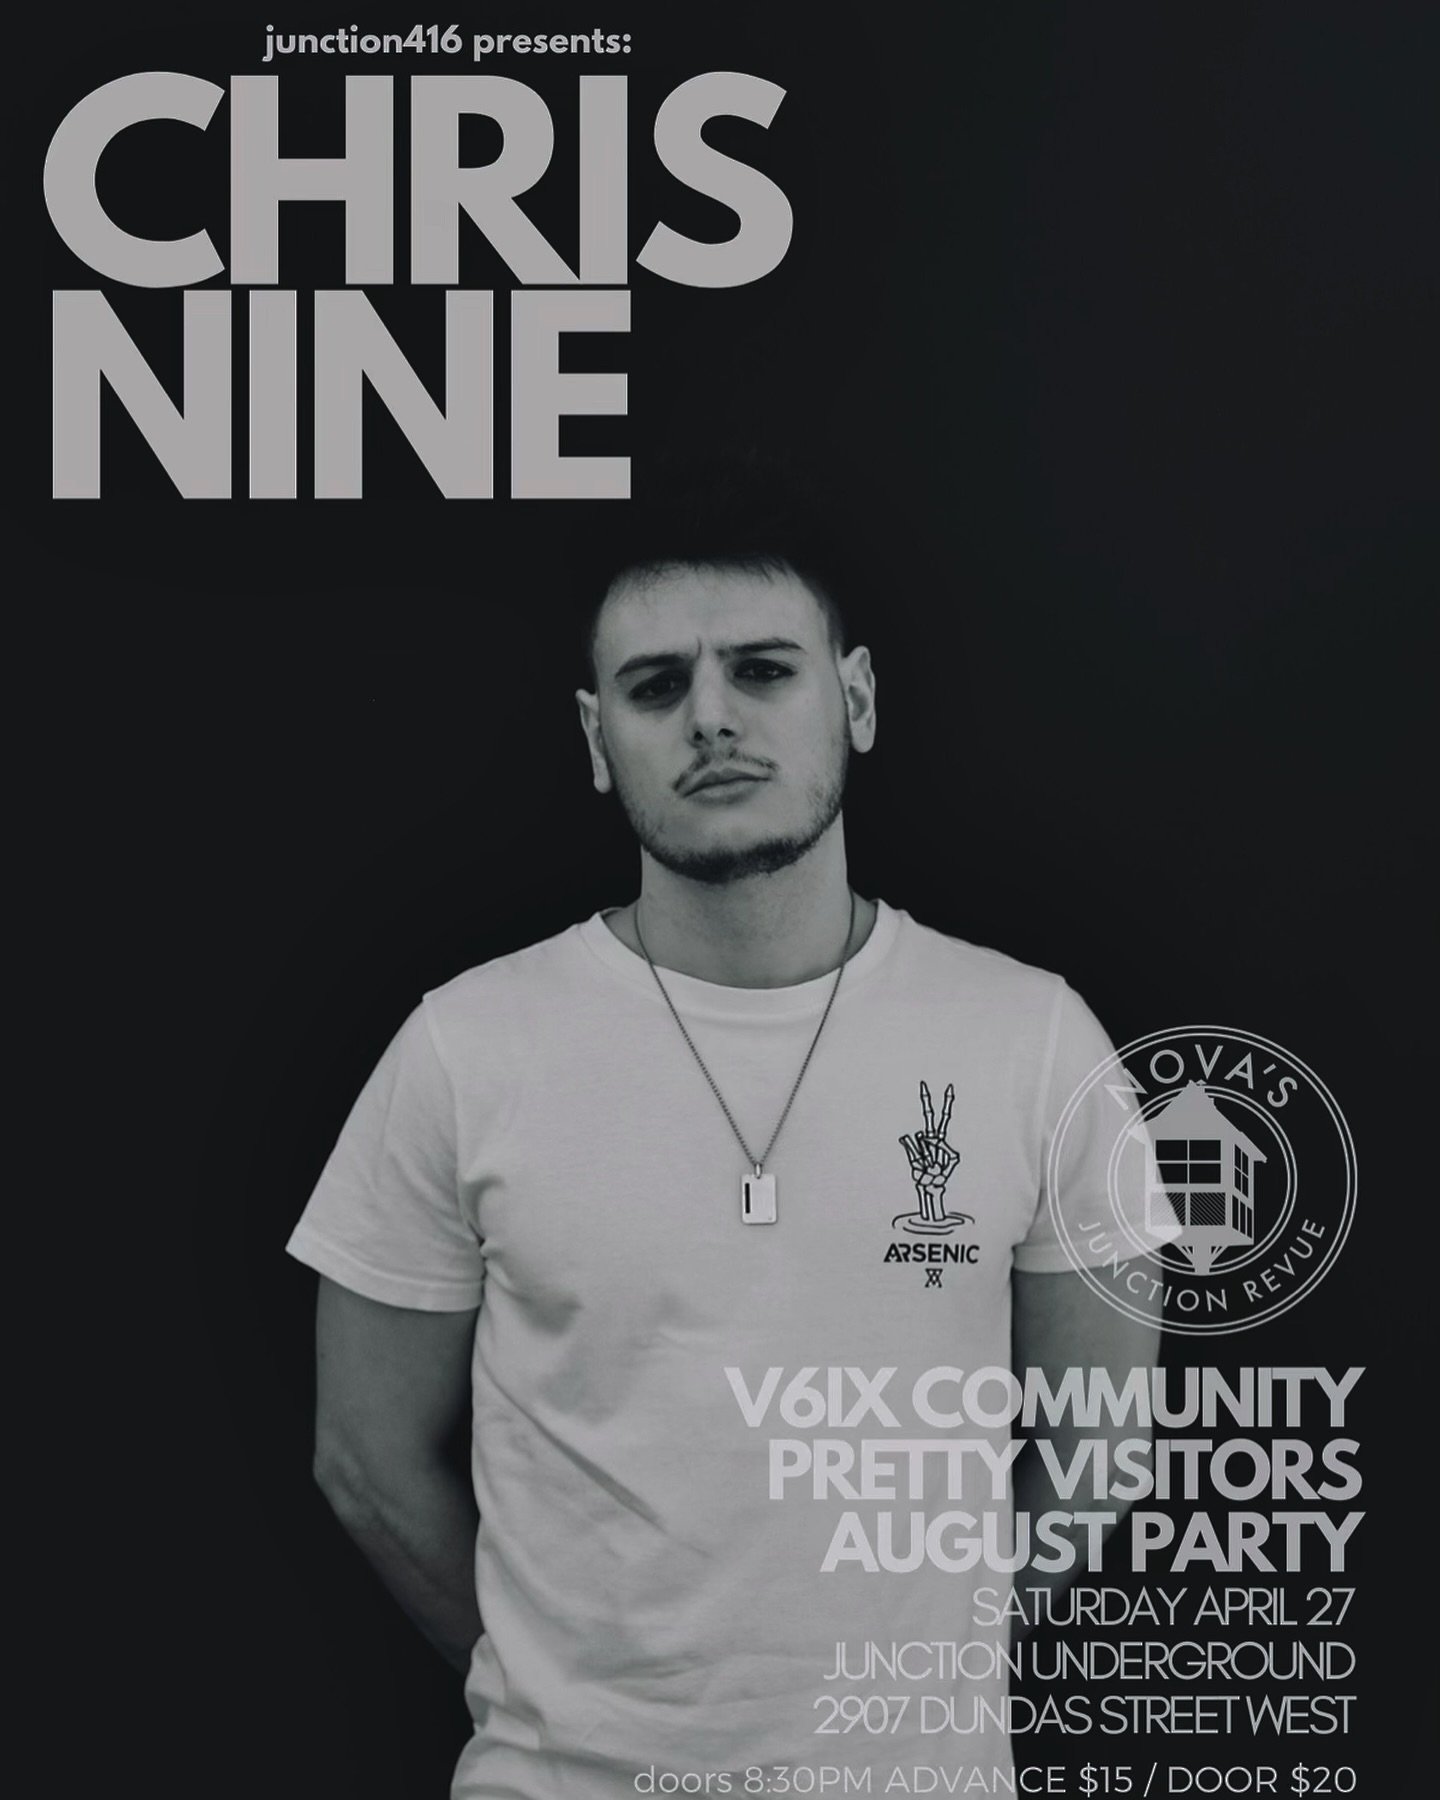 Saturday April 27th. V6IX Community Presents Chris Nine, Pretty Visitors and August Party. Doors open at 8:30pm $20 at the door for the bands.